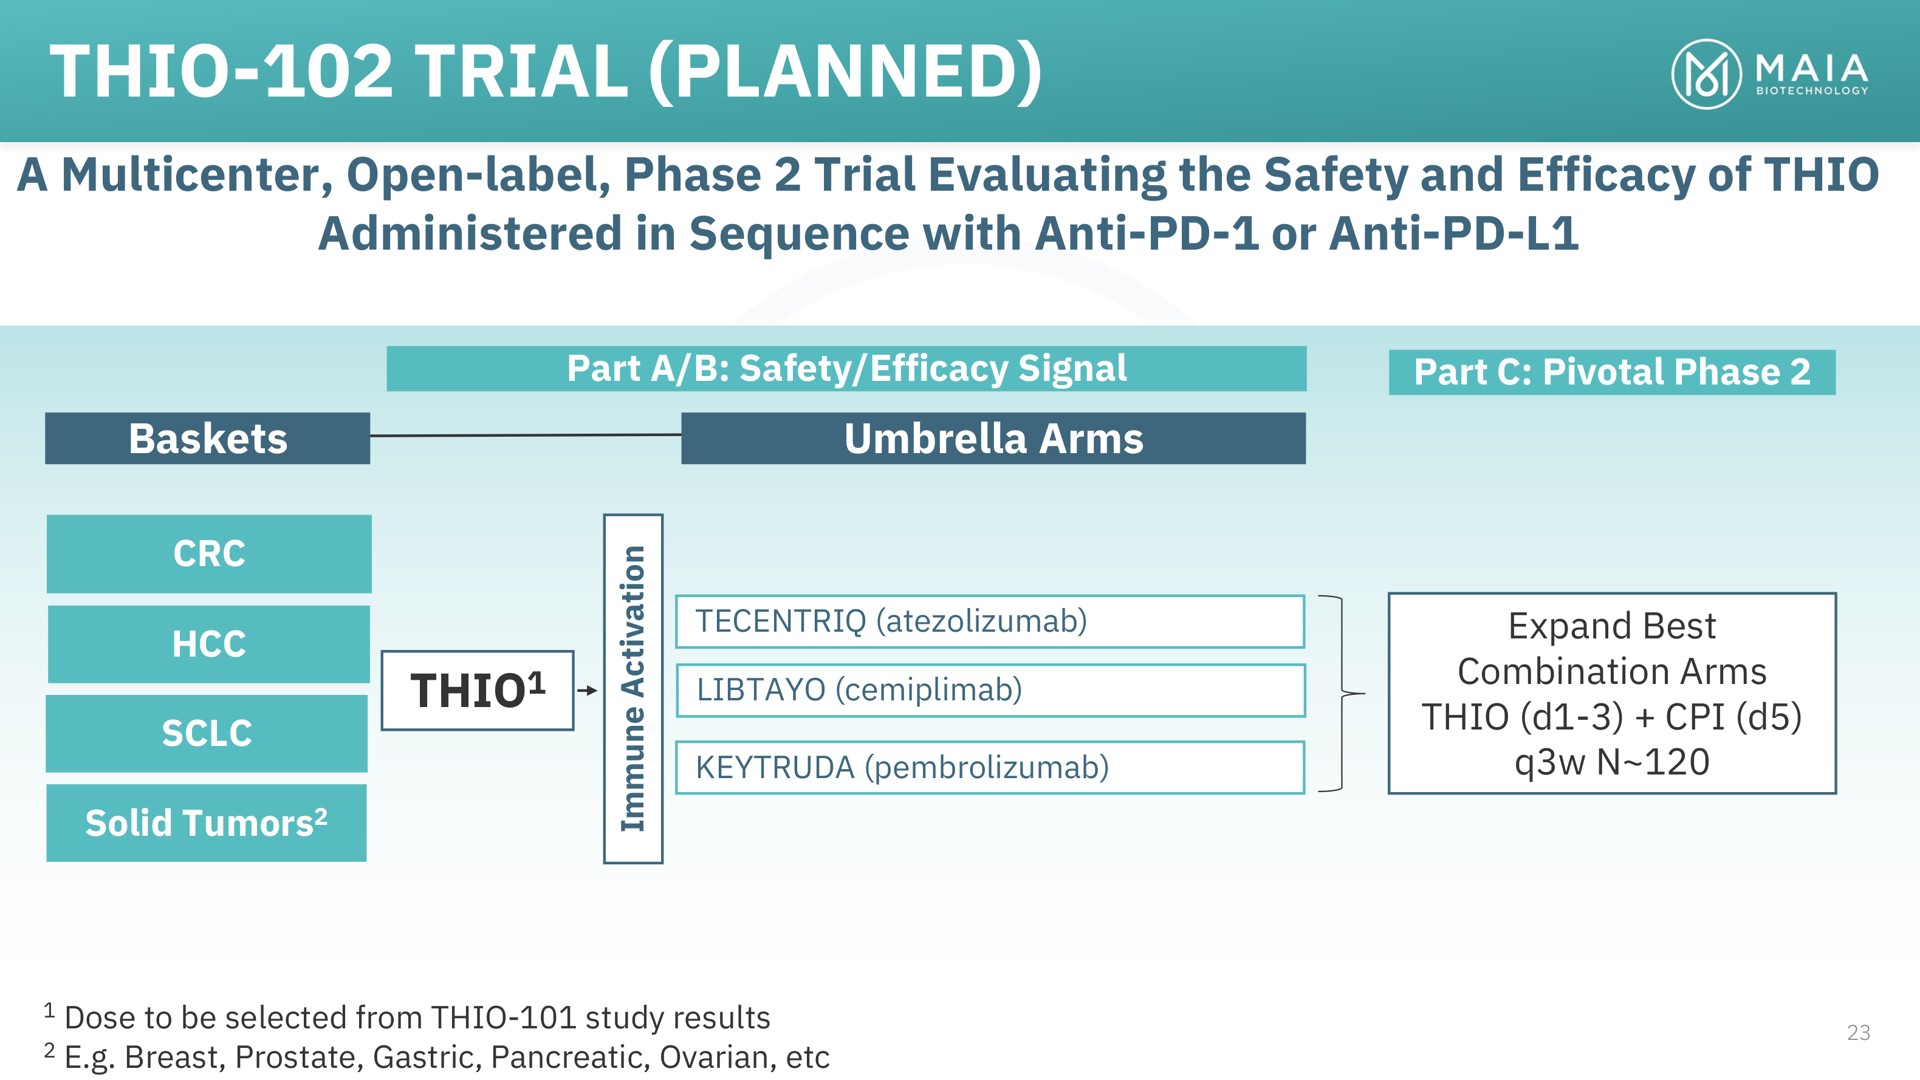 thio trial planned to expand best combination arms | MAIA Biotechnology